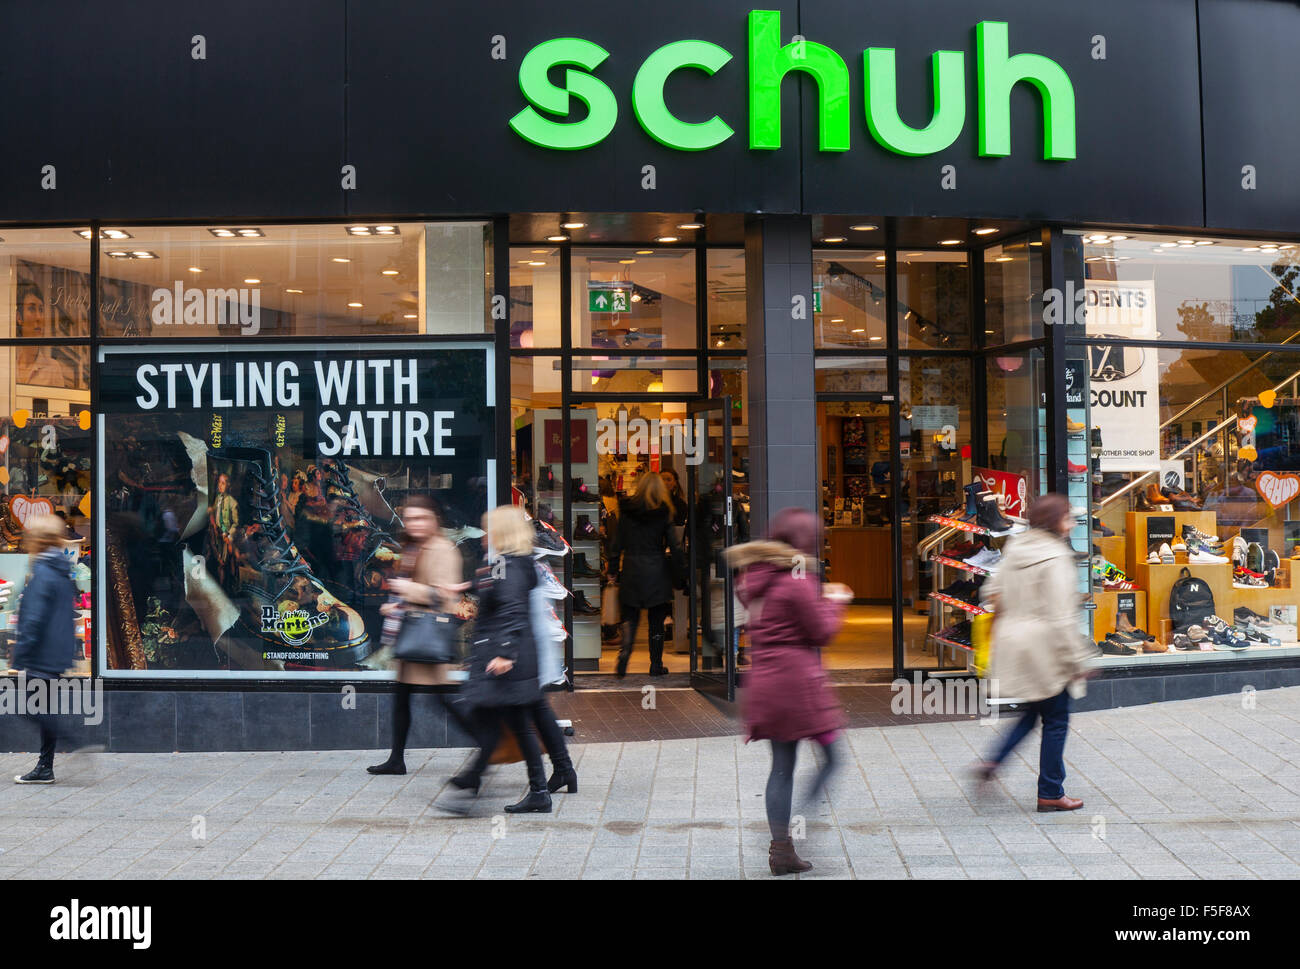 Styling with Satire   Schuh promotion in Liverpool Merseyside, UK. Liverpools business district. Stock Photo